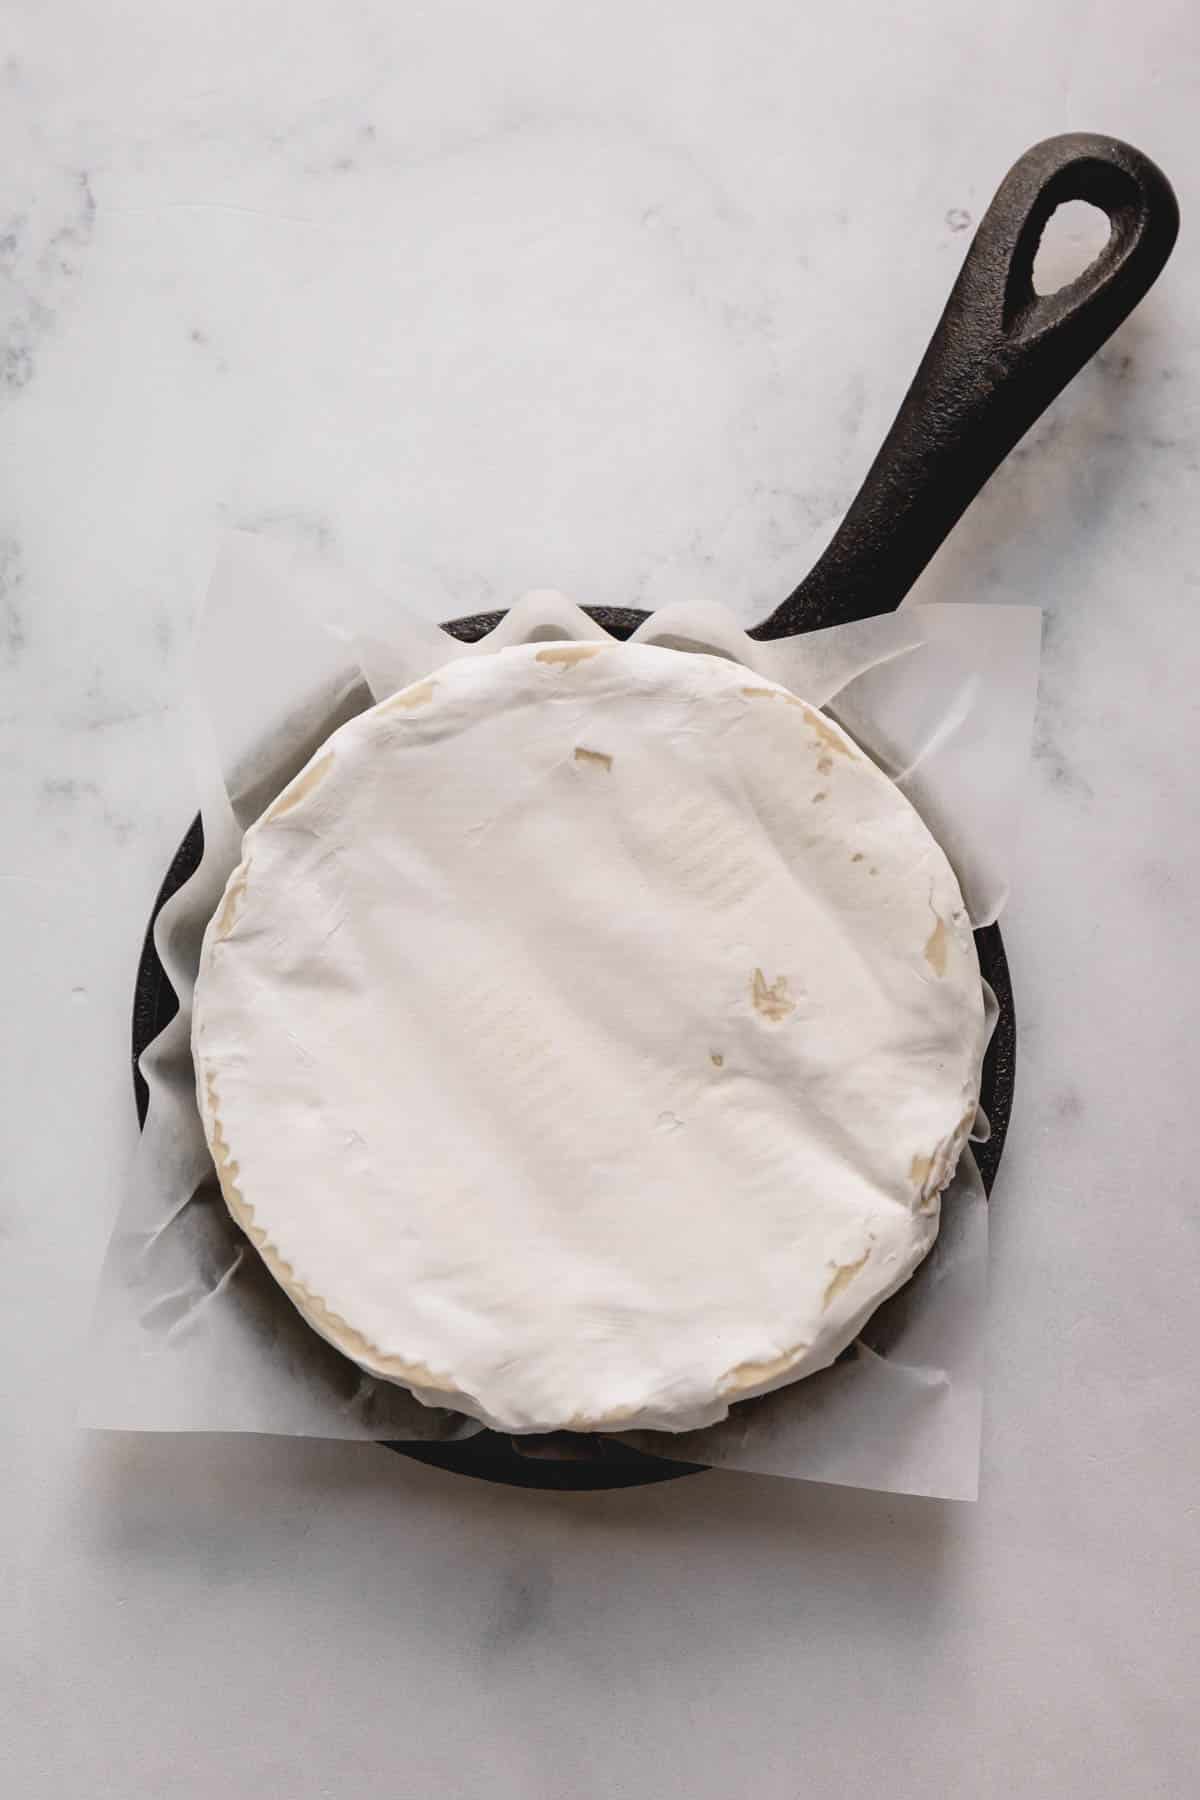 A wheel of brie in a small cast iron skillet lined with parchment paper.